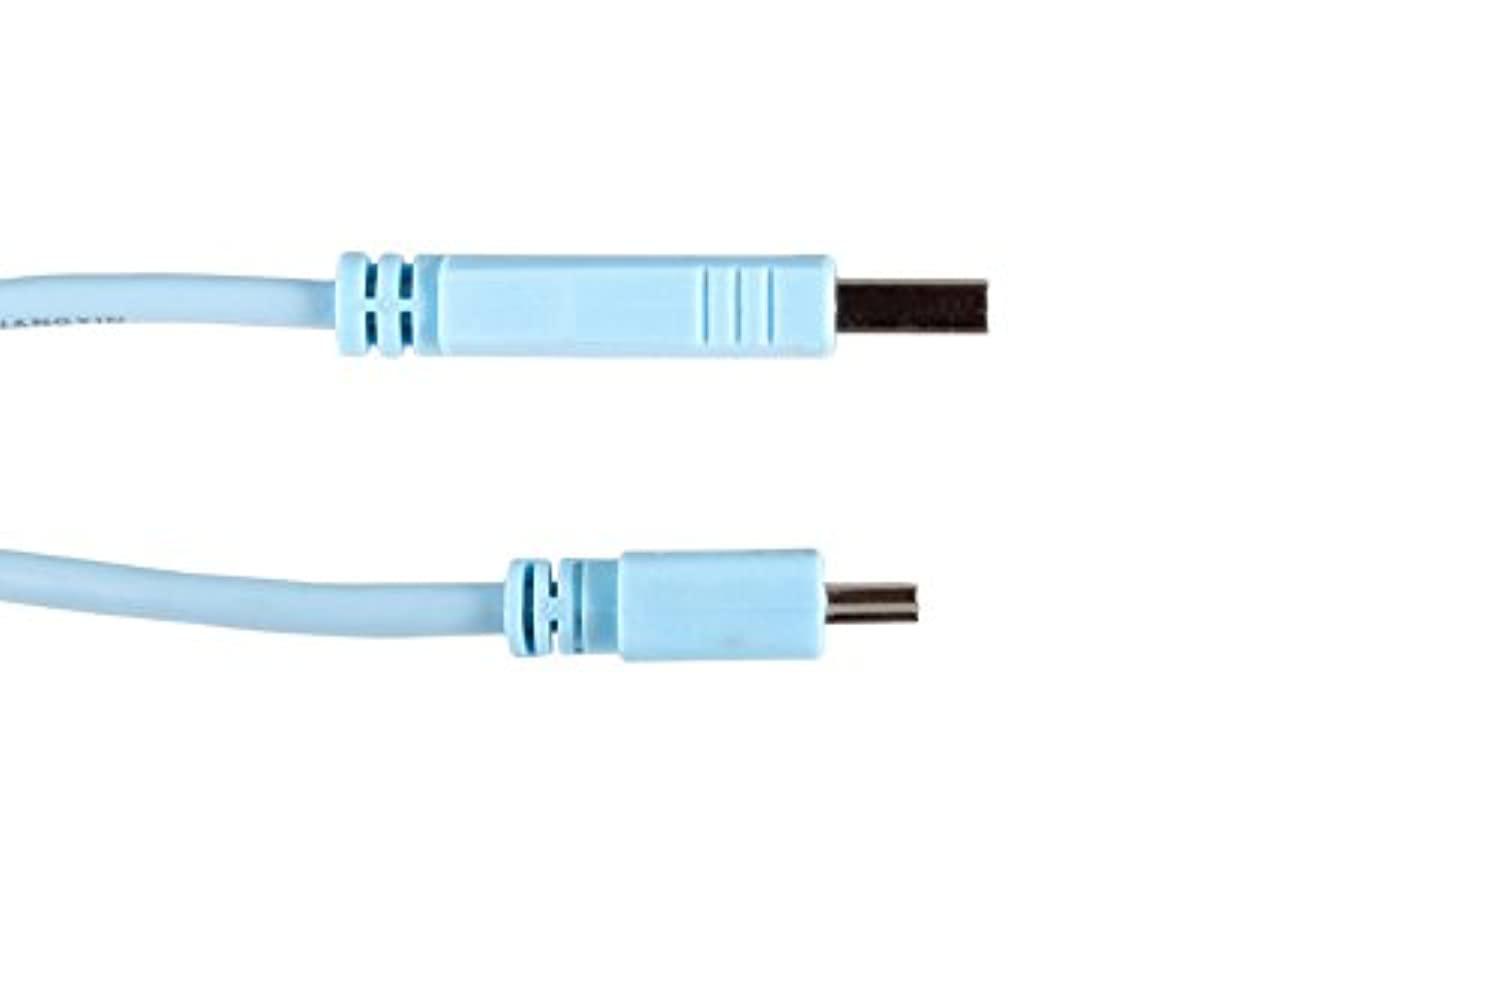 rw routerswholesale usb 2.0 console cable compatible/replacement for cisco a-male to mini-b cord - 6 feet (1.8 meters)